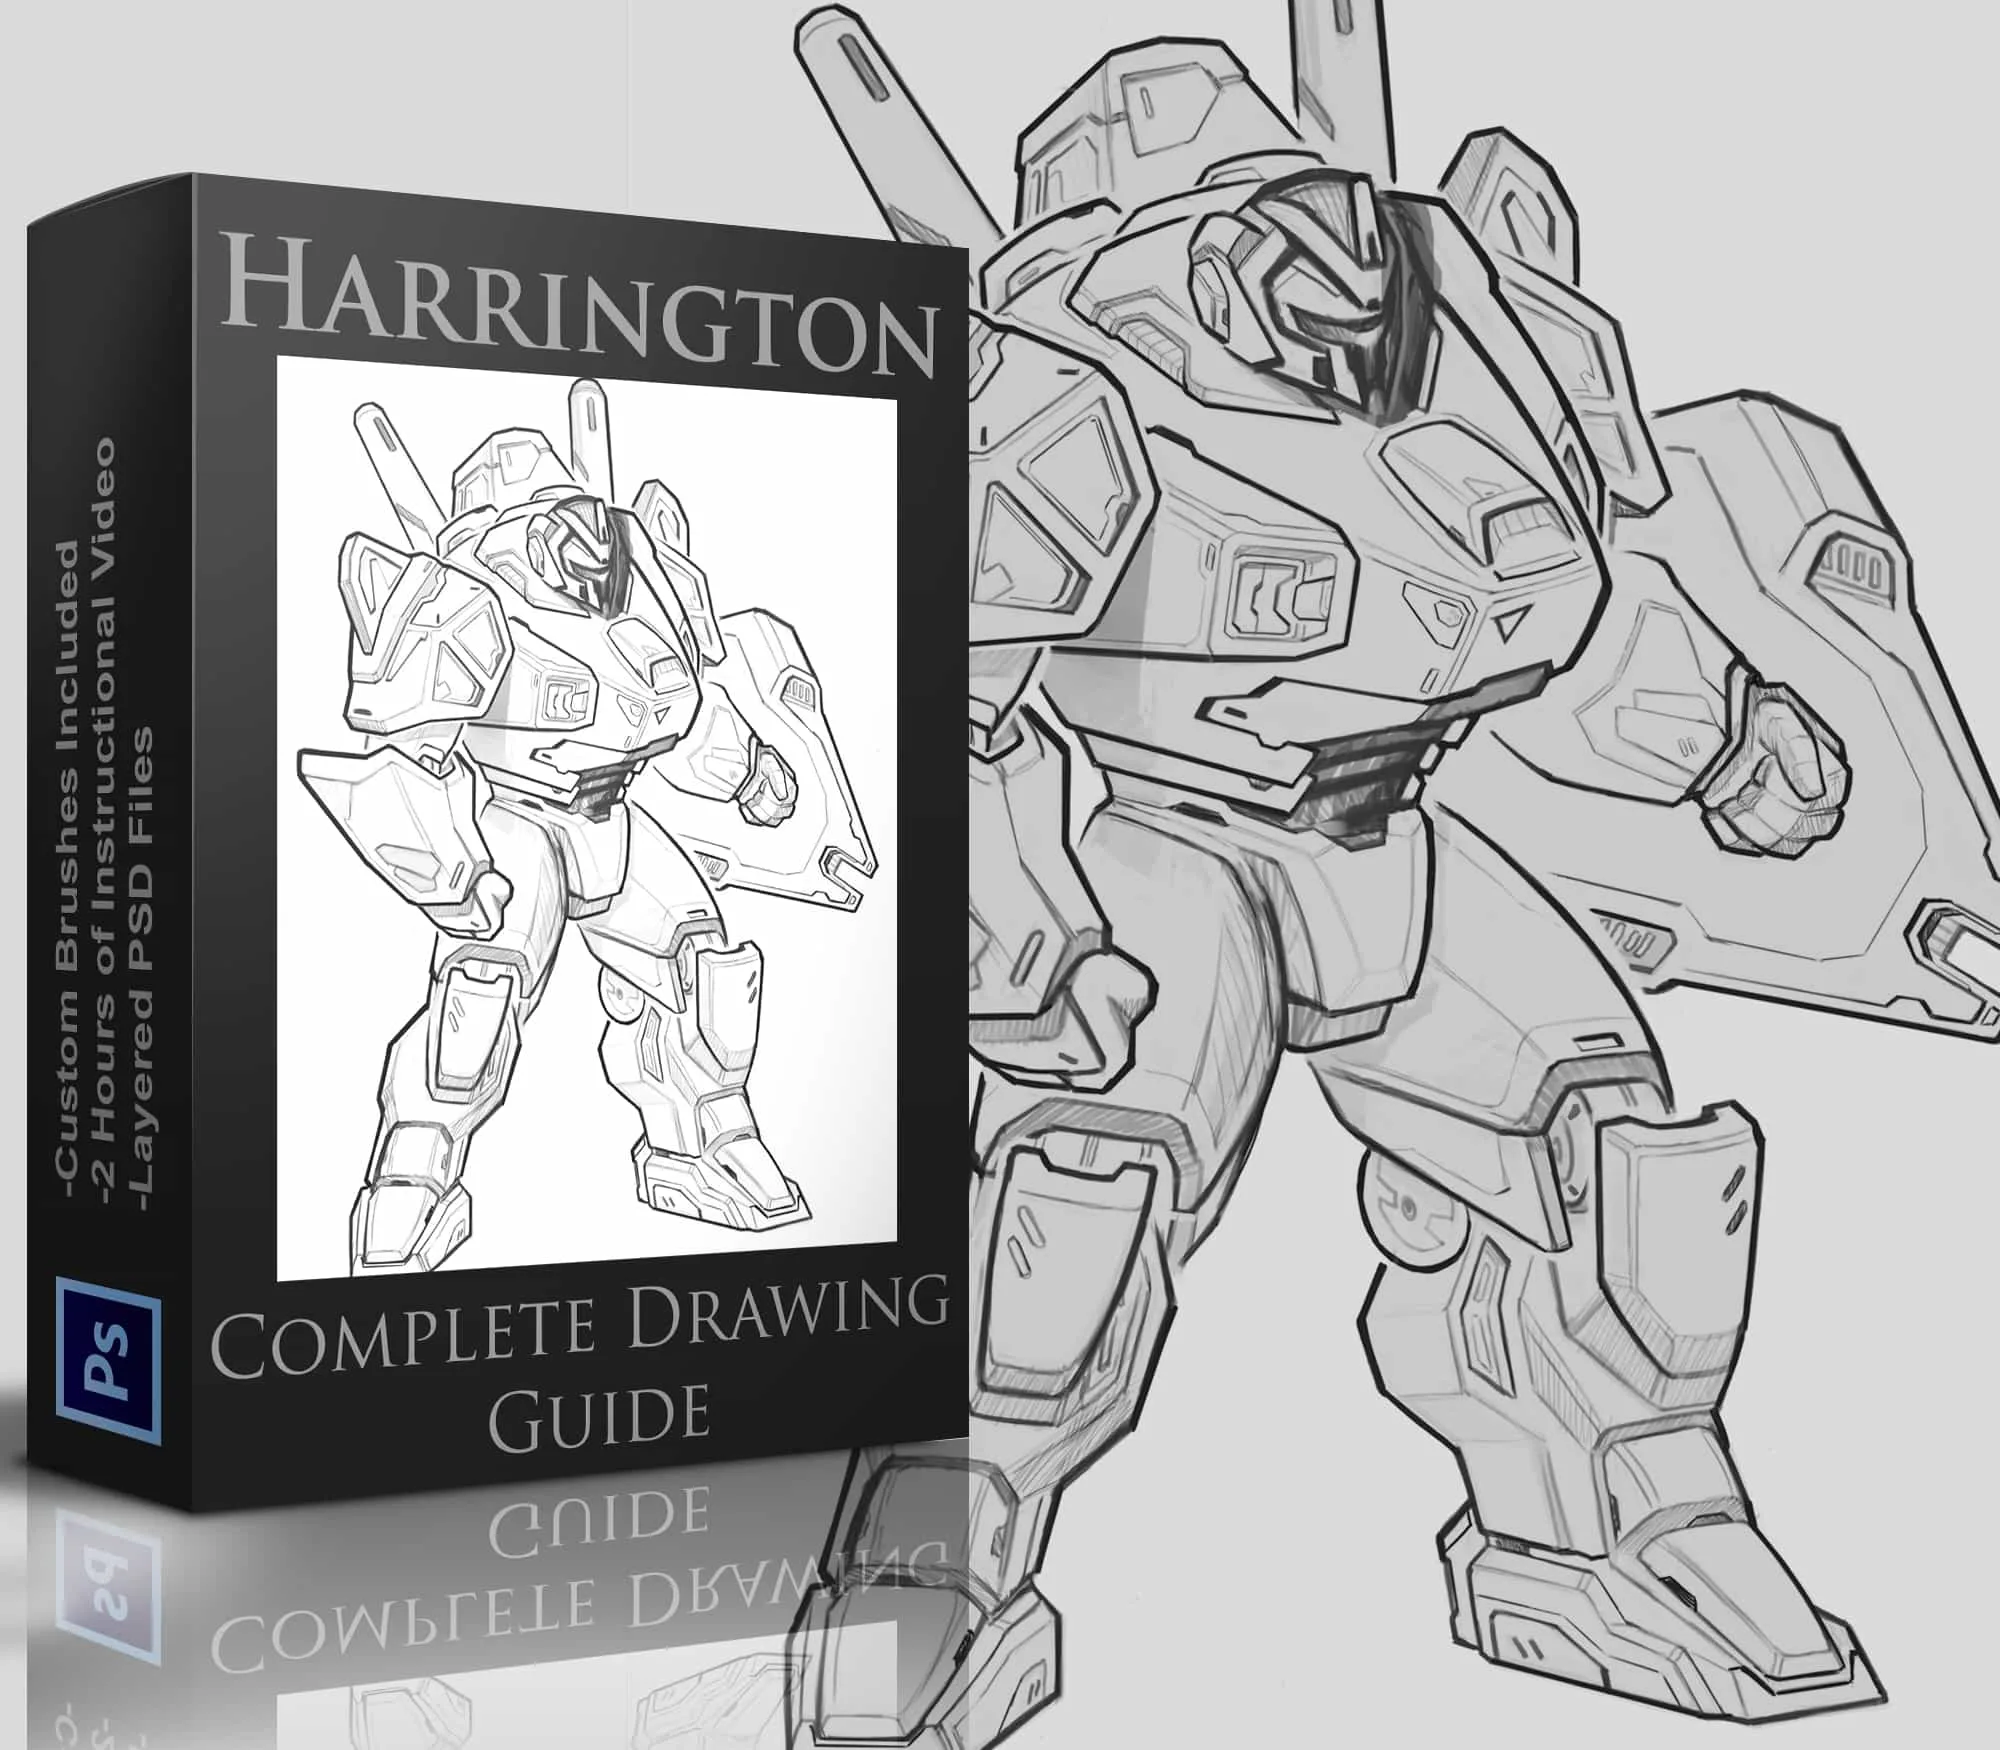 Complete Drawing Guide